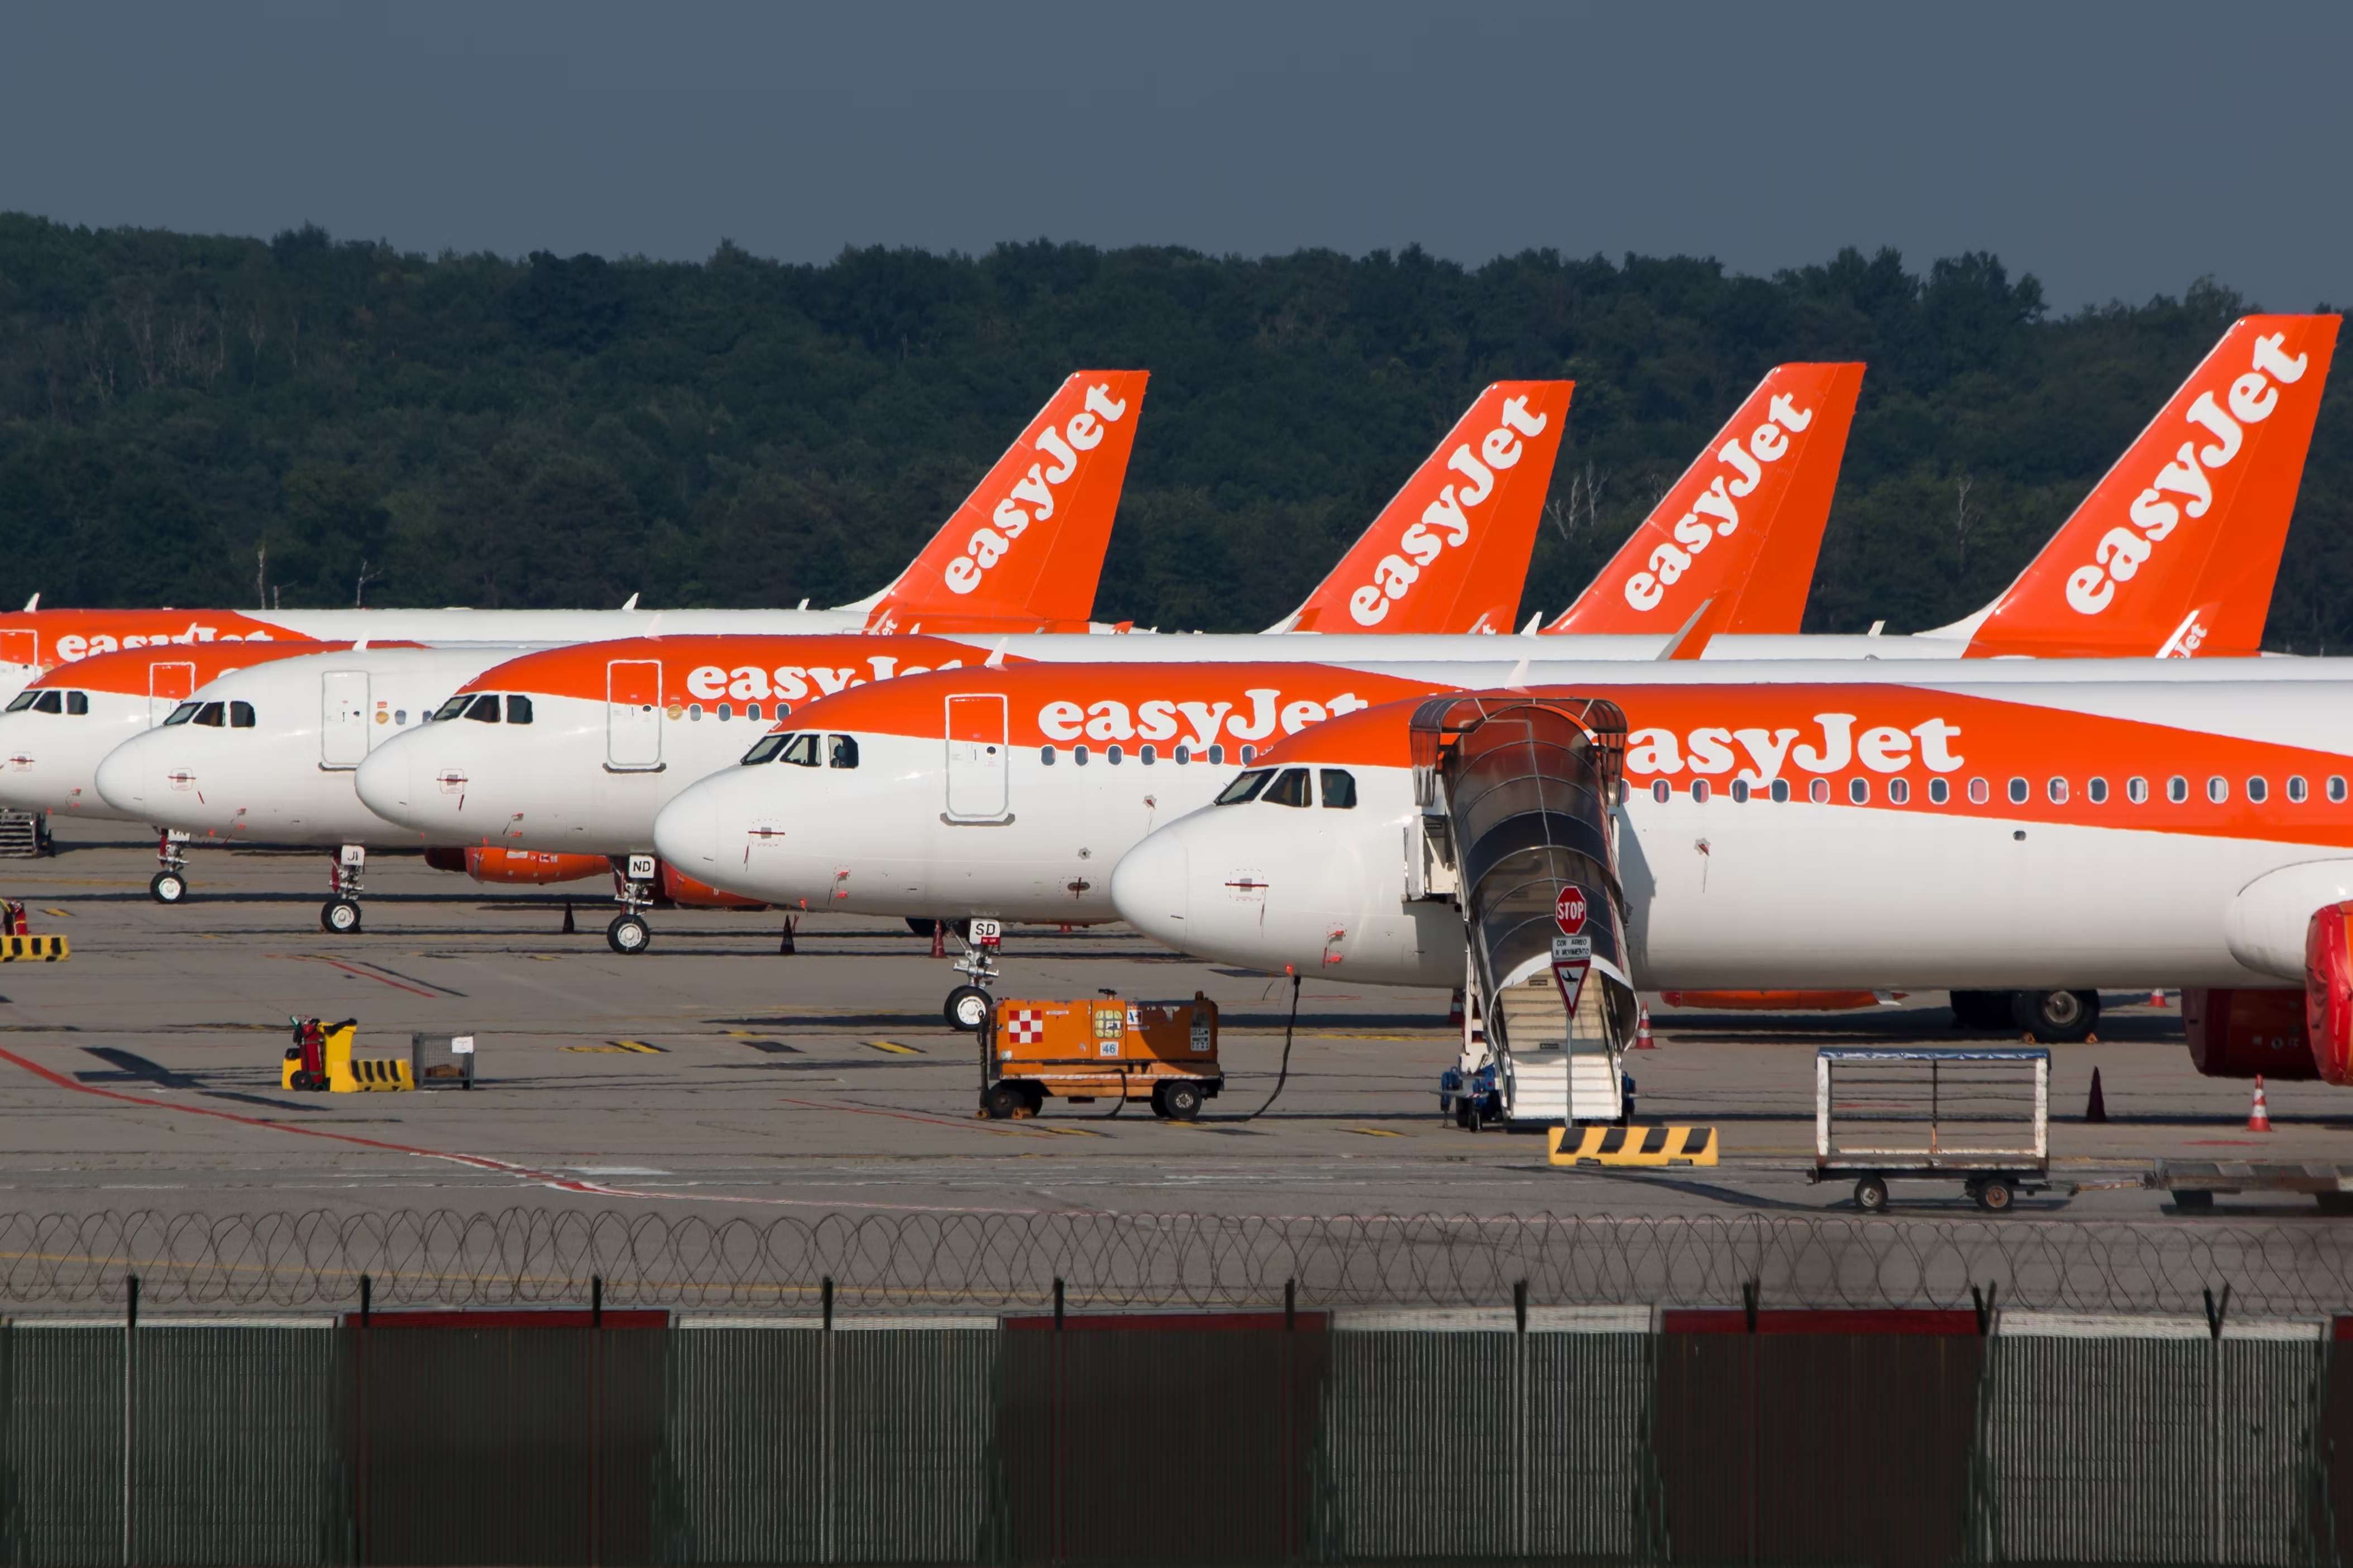 Several easyJet aircraft lined up on the apron.